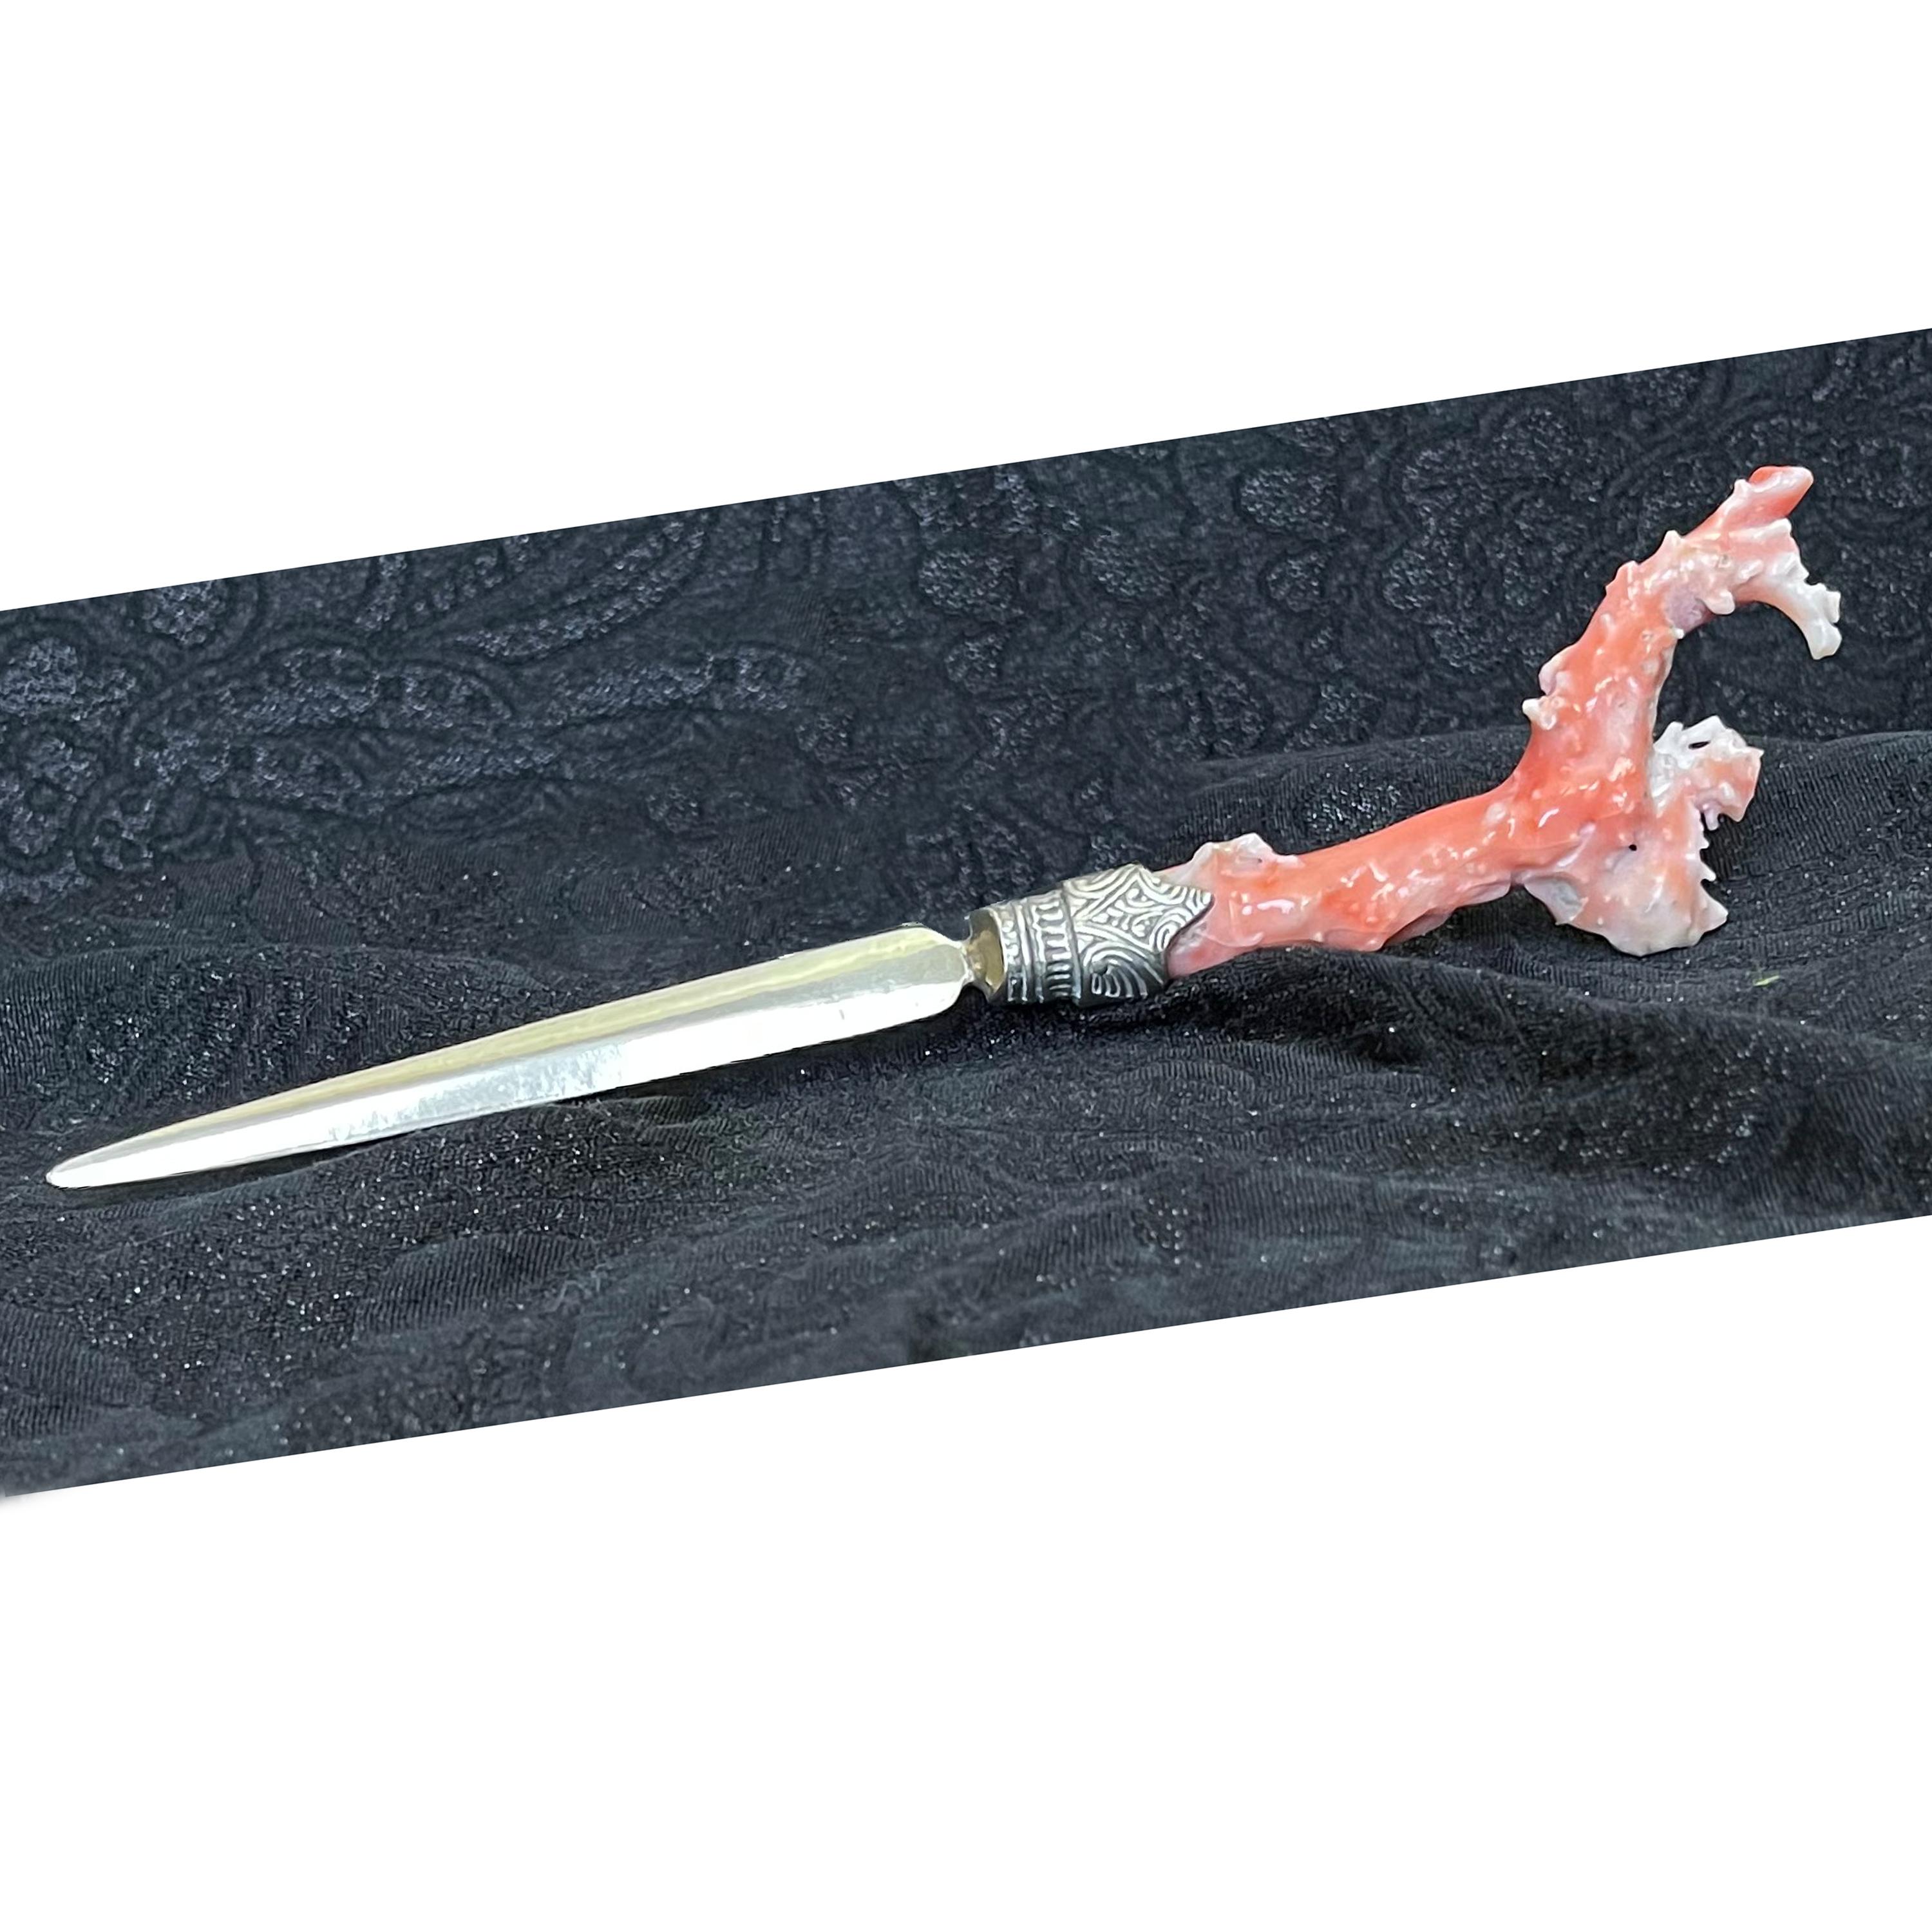 This silver and antique coral letter opener was handmade by our talented goldsmiths, who used a coral branch from Sciacca, the Sicilian town famous for its corals.
The Sciacca Coral has unique origins in the world: it is closely tied to the